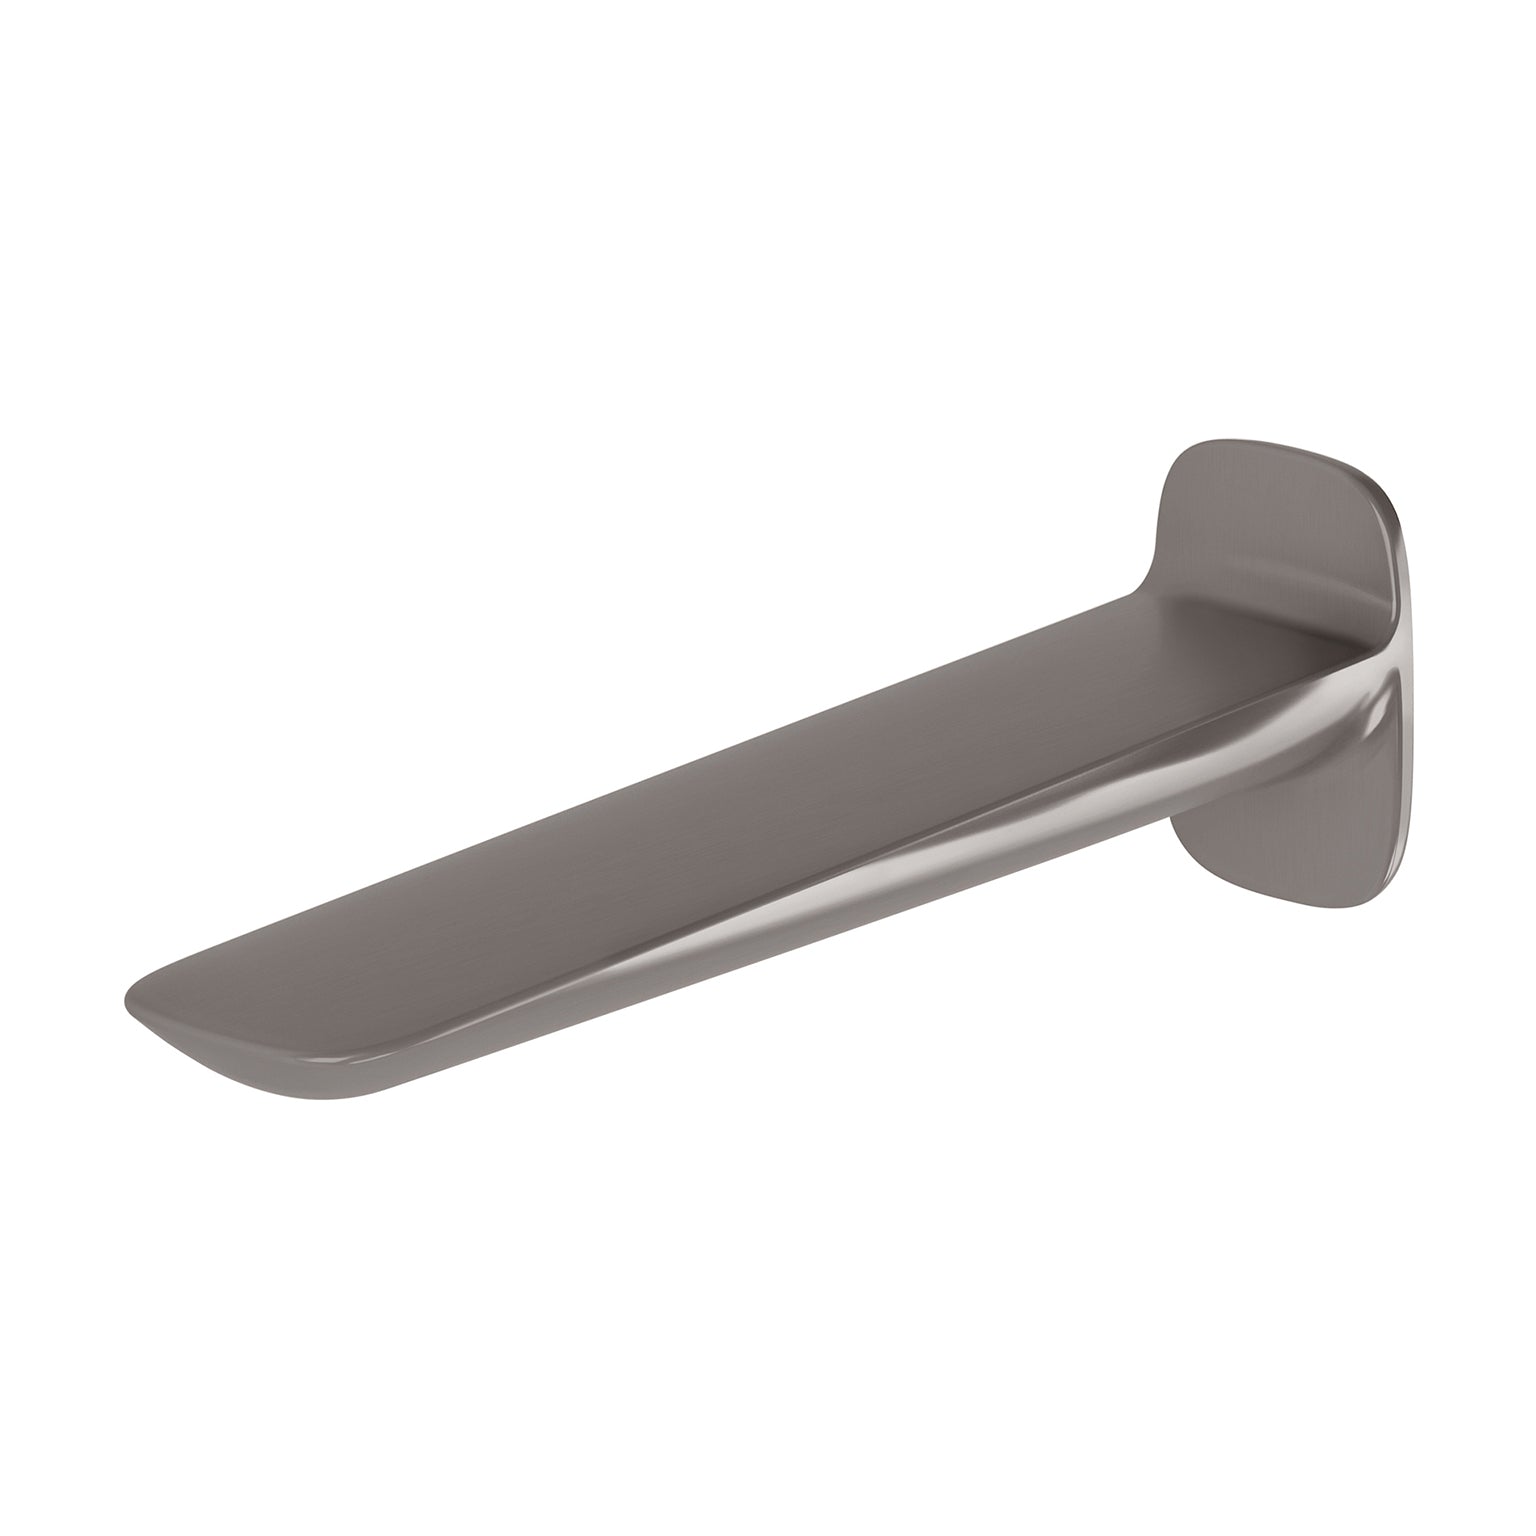 PHOENIX NUAGE WALL BASIN BATH OUTLET 200MM BRUSHED CARBON